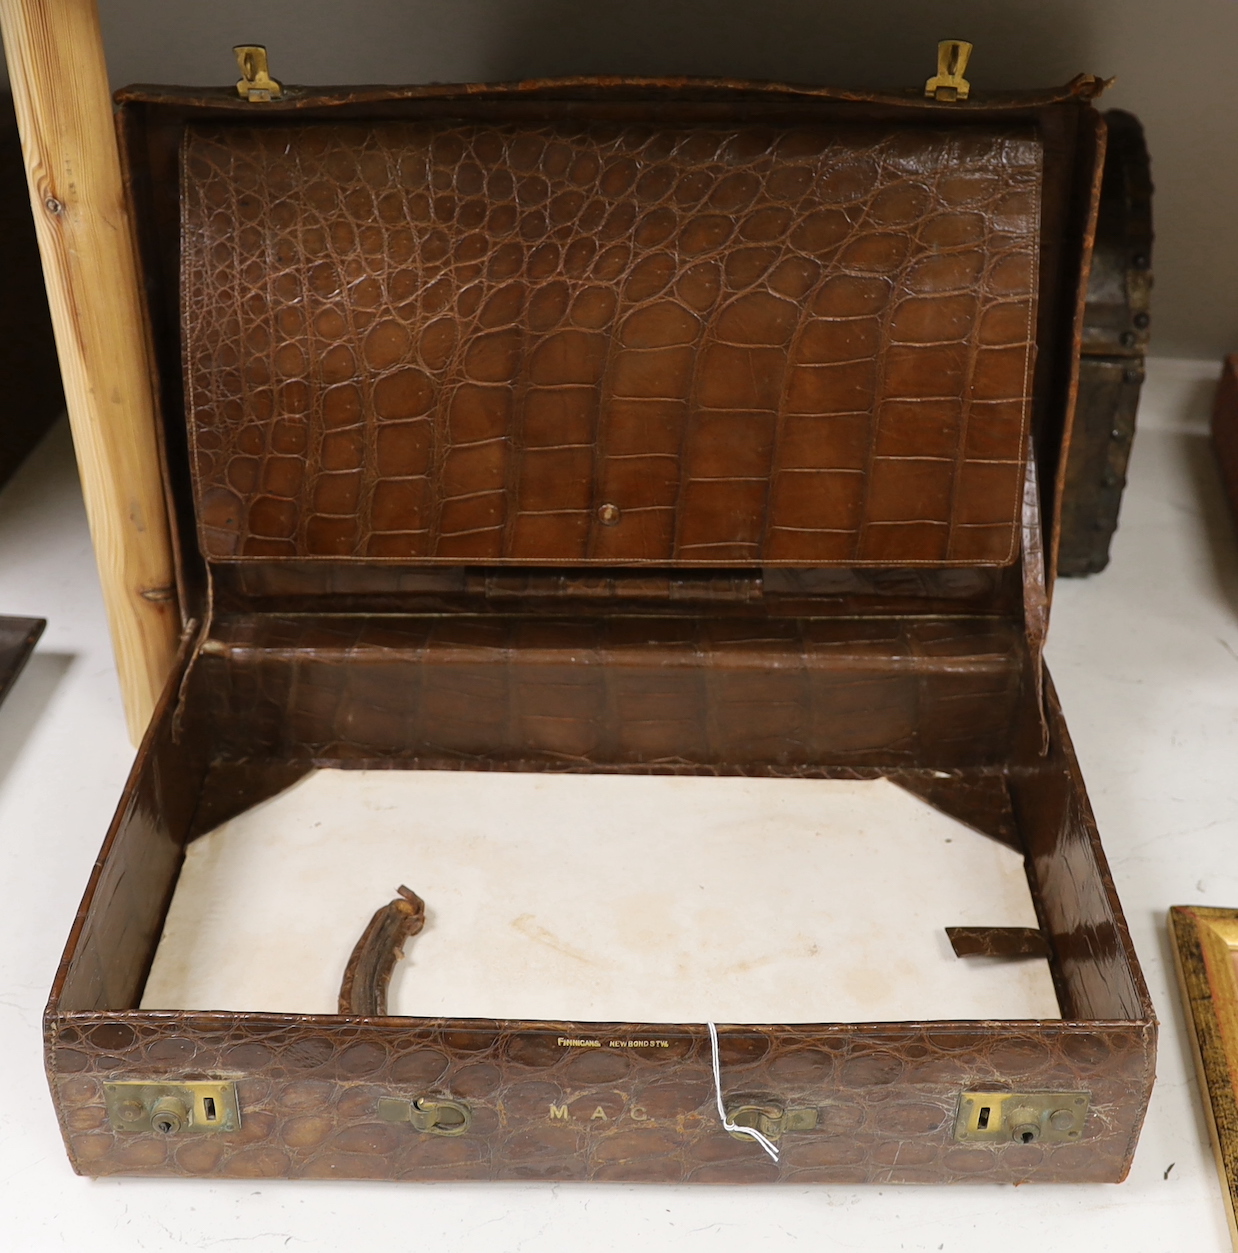 A Finnigans crocodile leather attaché case, pre 1940, with interior figments and blotter, 45cm wide, - Image 2 of 4